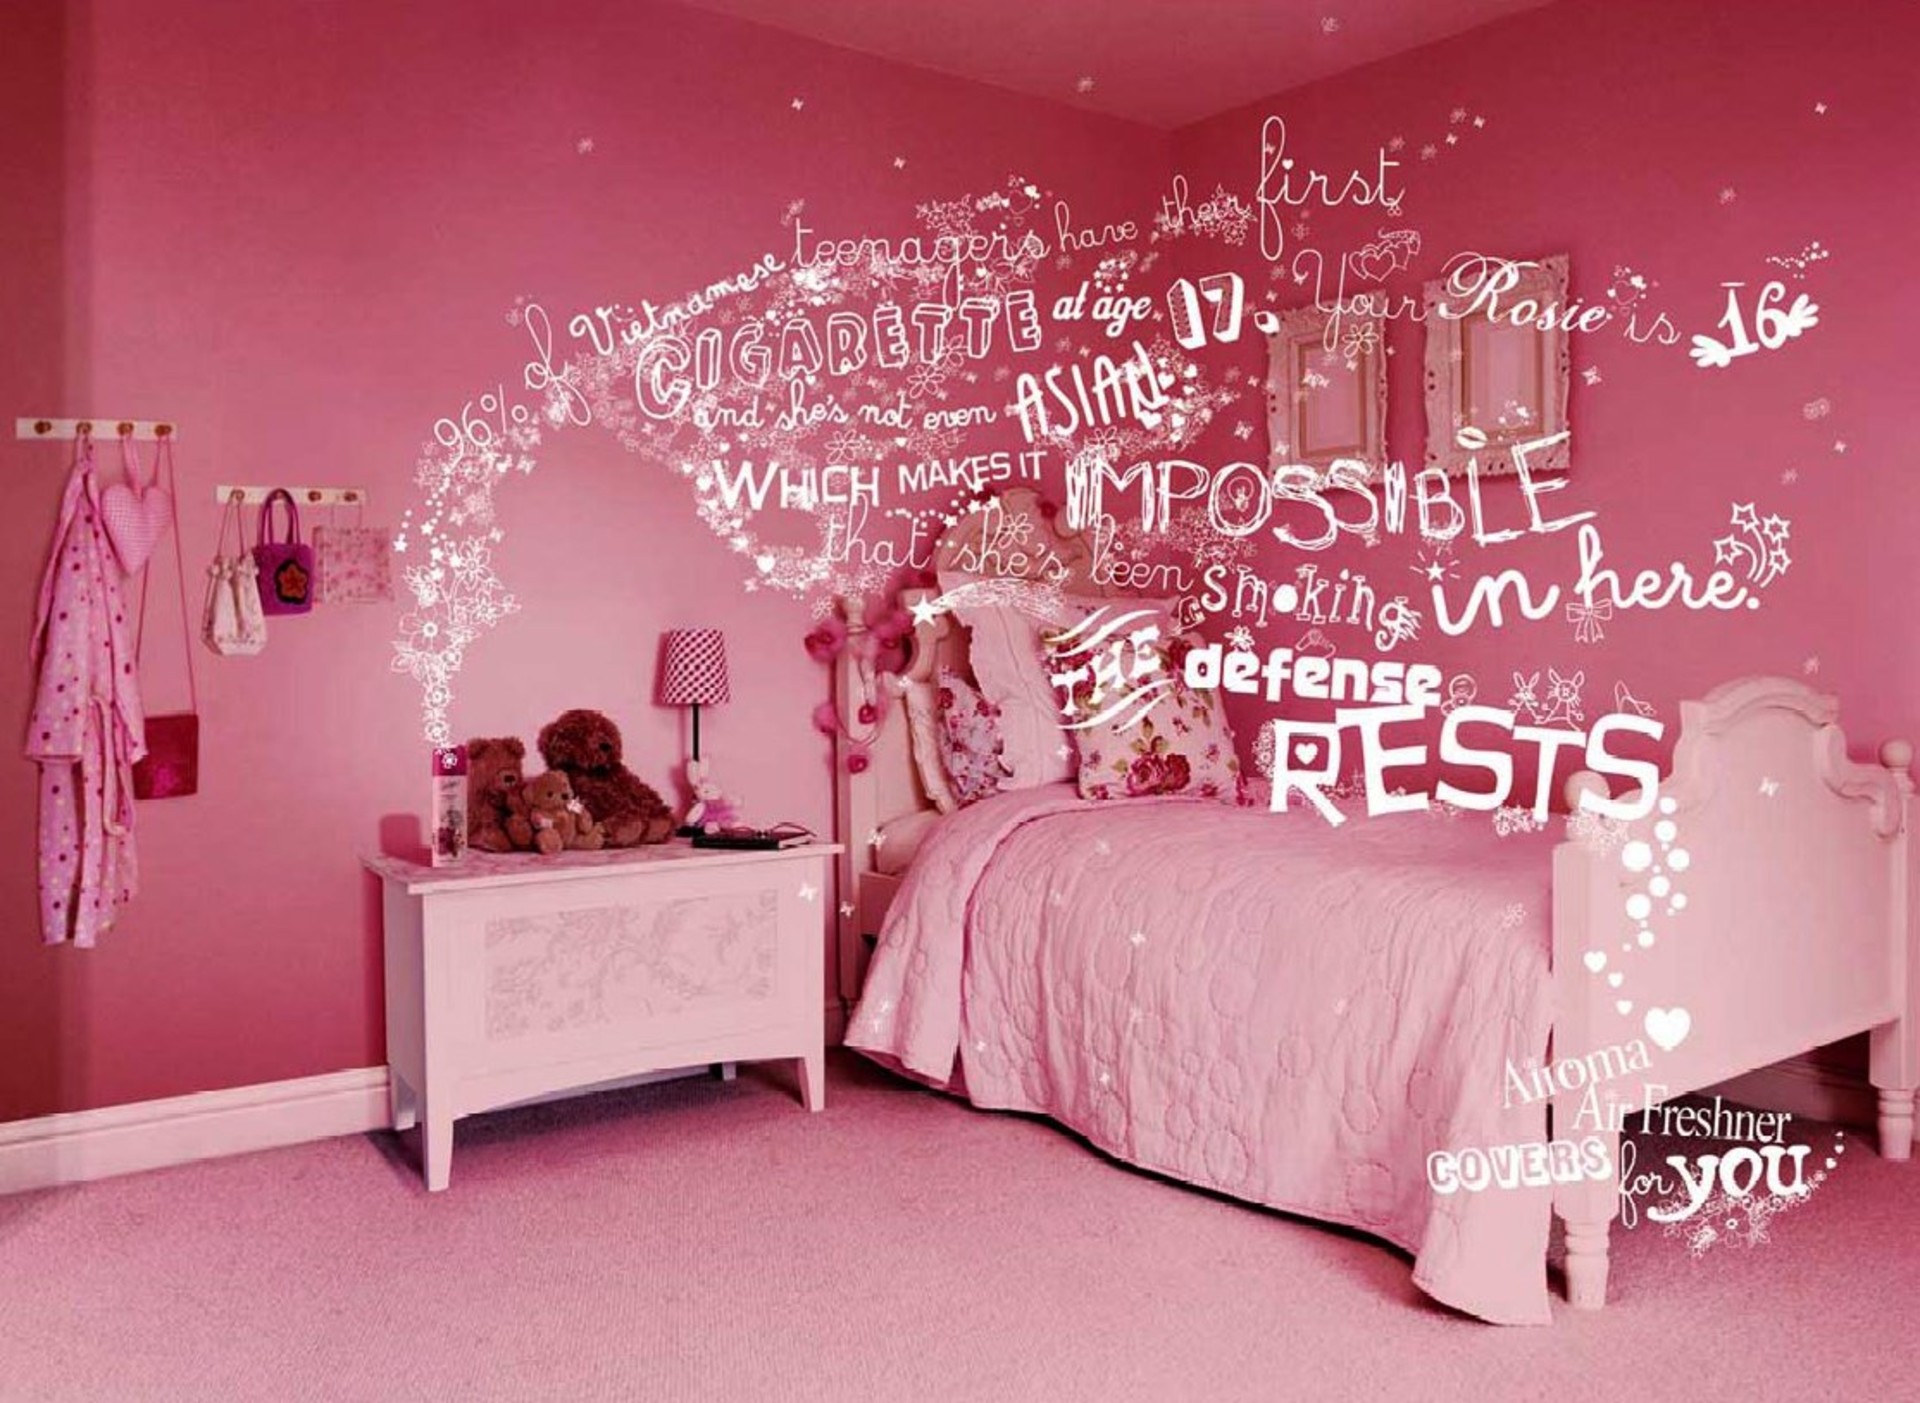 Girls Bedroom Color Schemes Pictures Options Ideas - Light Pink Room Paint - HD Wallpaper 